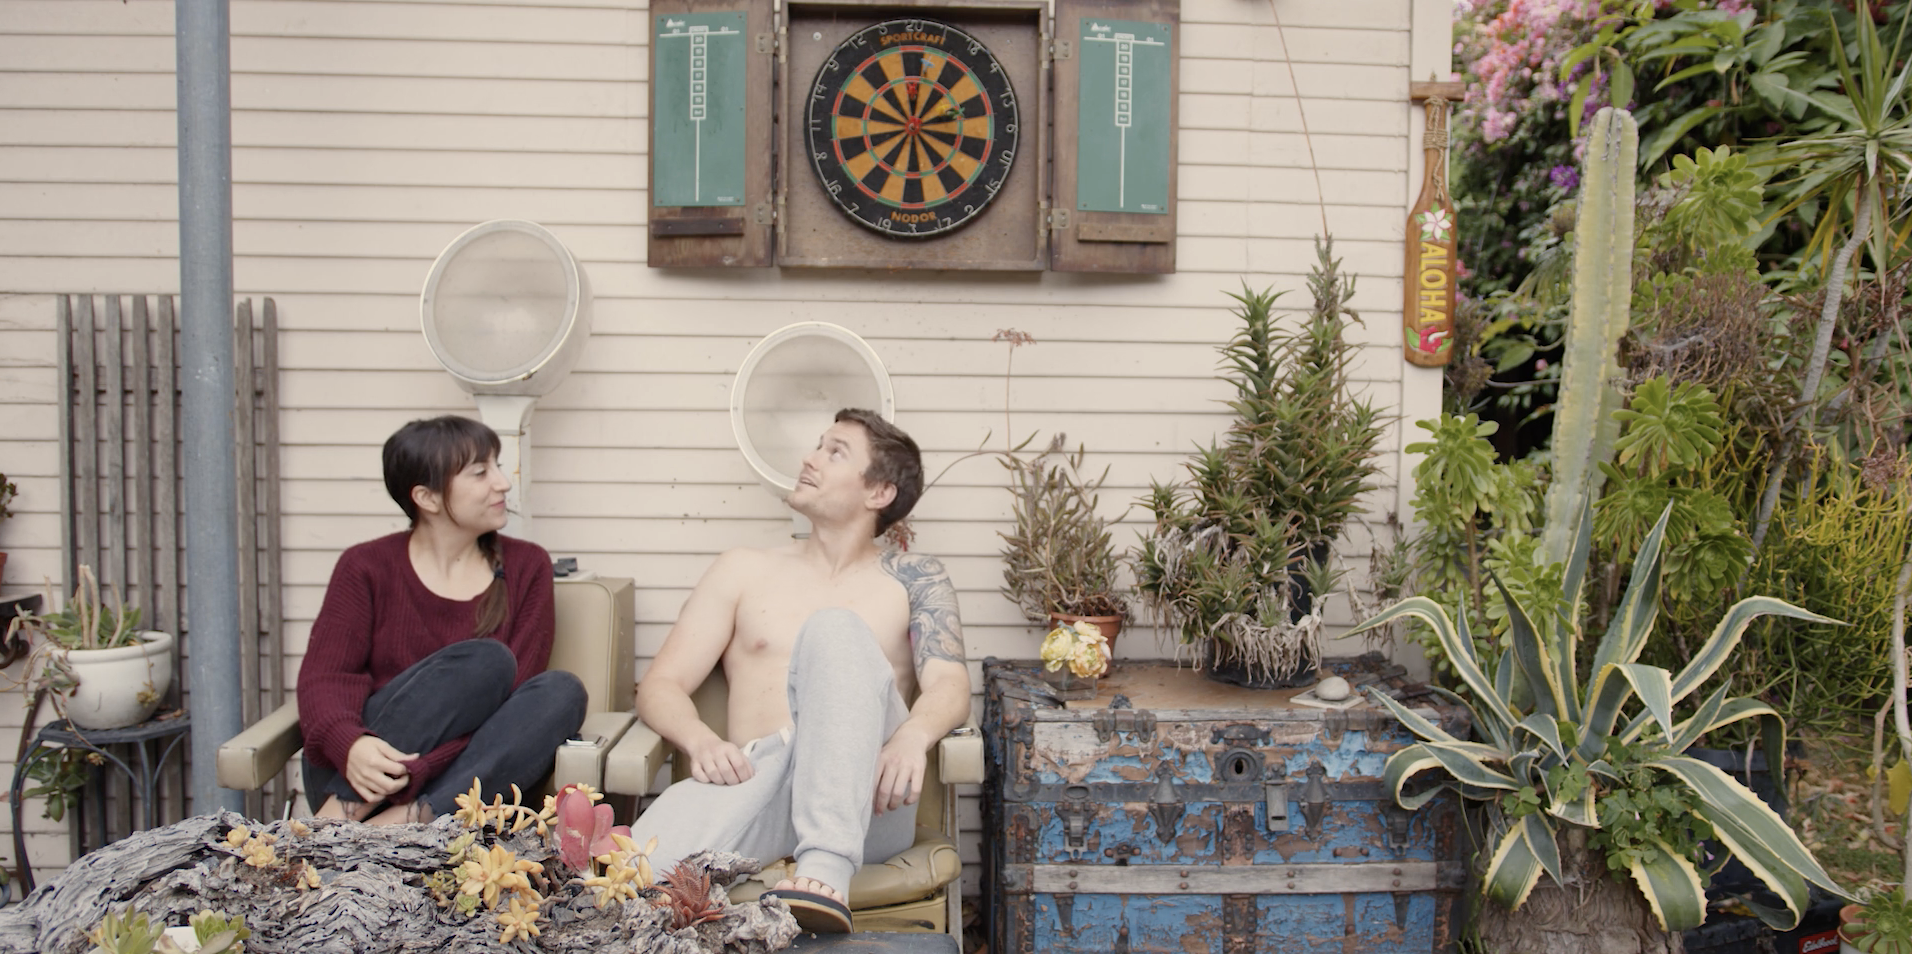 leah and nick sit in garden chairs in front of a small house with cactus next to them and a darts board above them